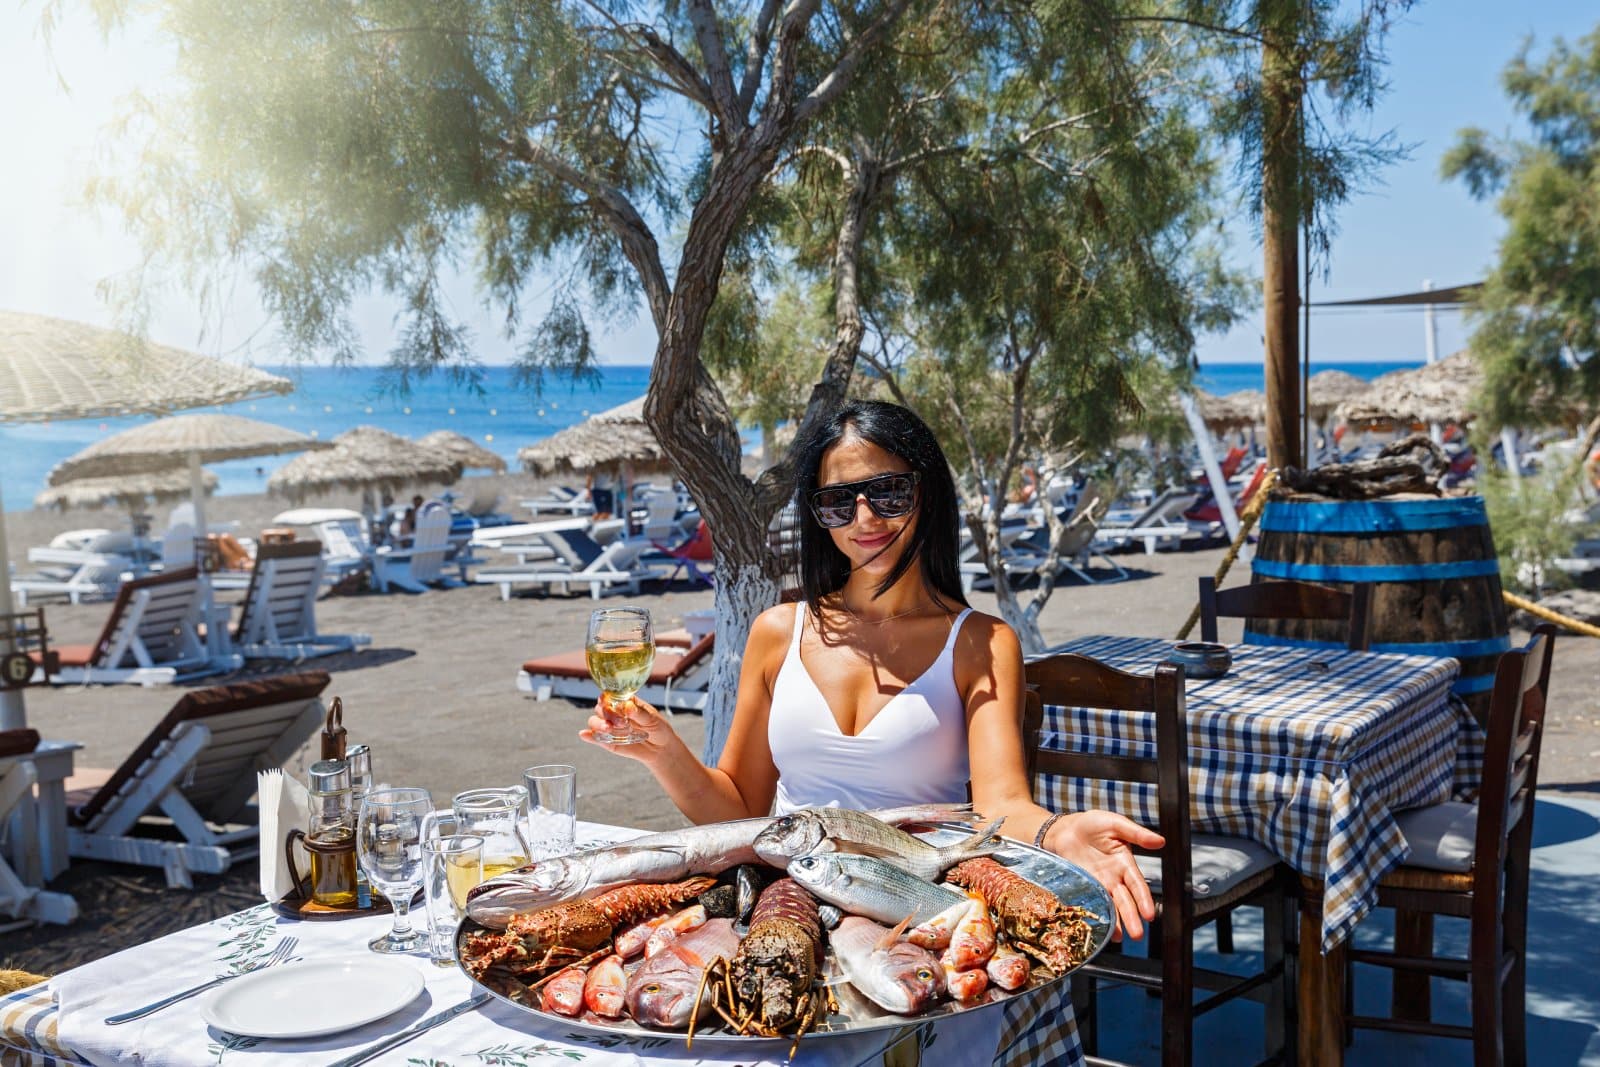 Image Credit: Shutterstock / Santorines <p>Happiness is a fresh lobster roll in one hand, a lighthouse selfie in the other, and not a traffic light in sight. Who needs city life when you have seafood?</p>